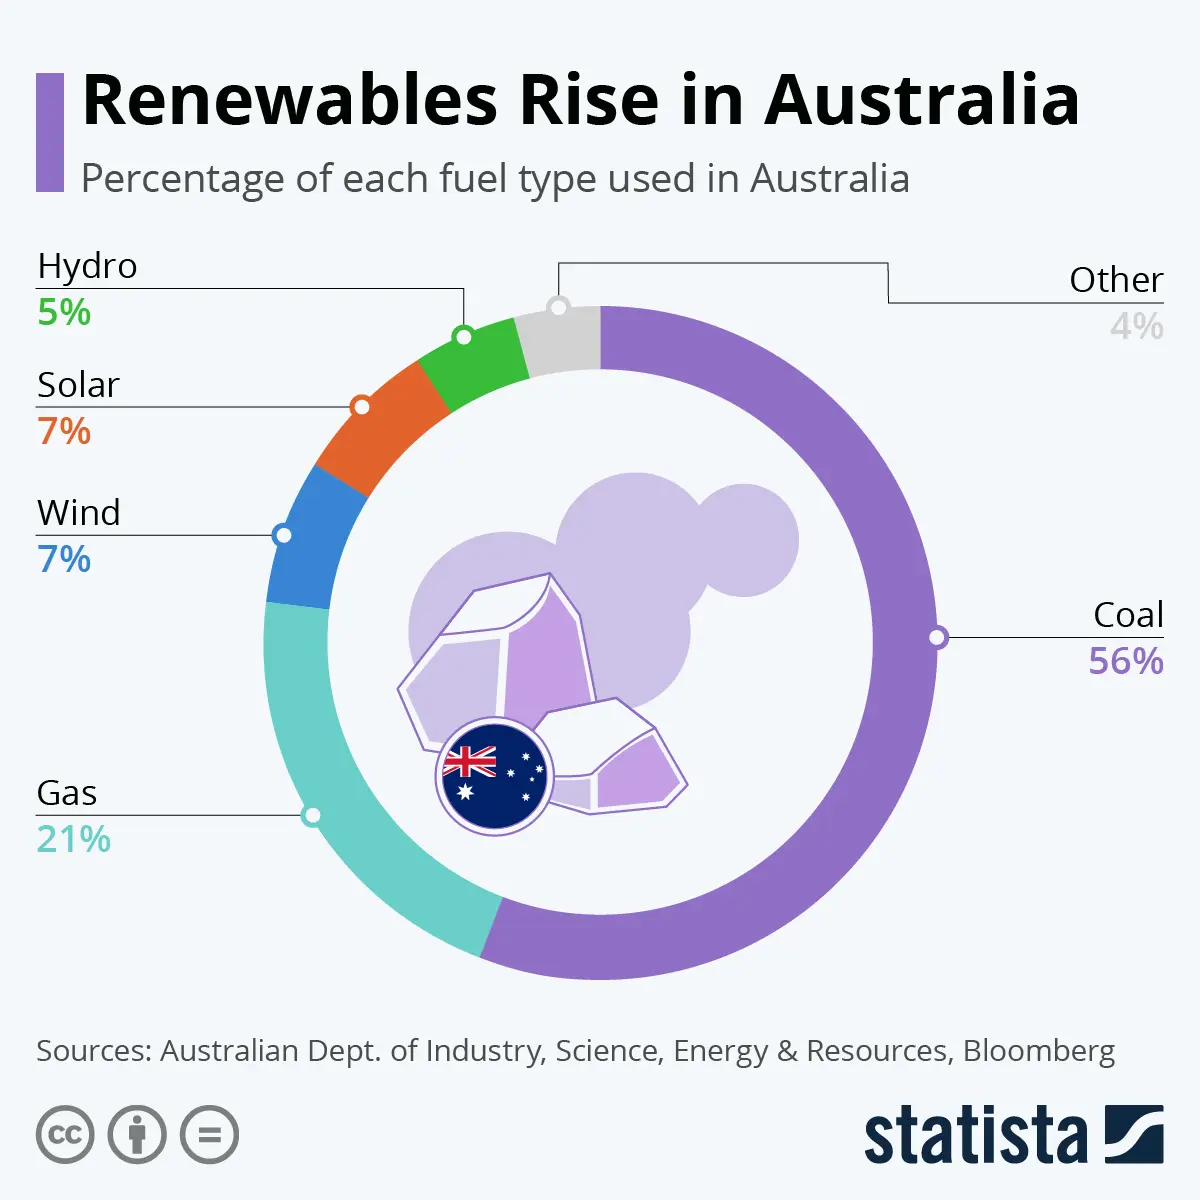 facts about solar energy in australia - What are the facts about Australia's energy